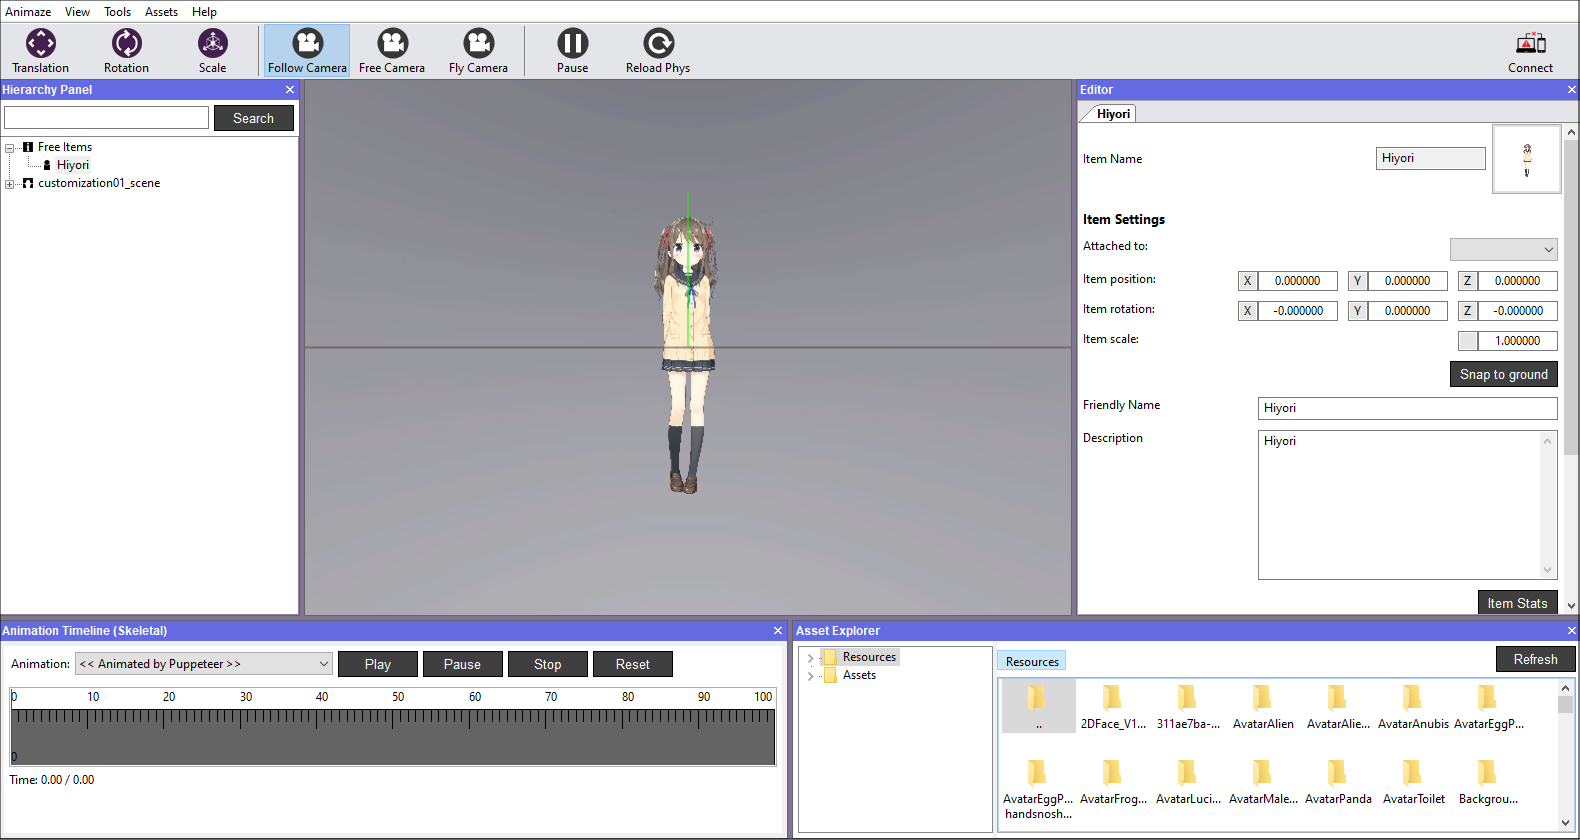 Once the avatar is imported, it will be displayed in the viewport.